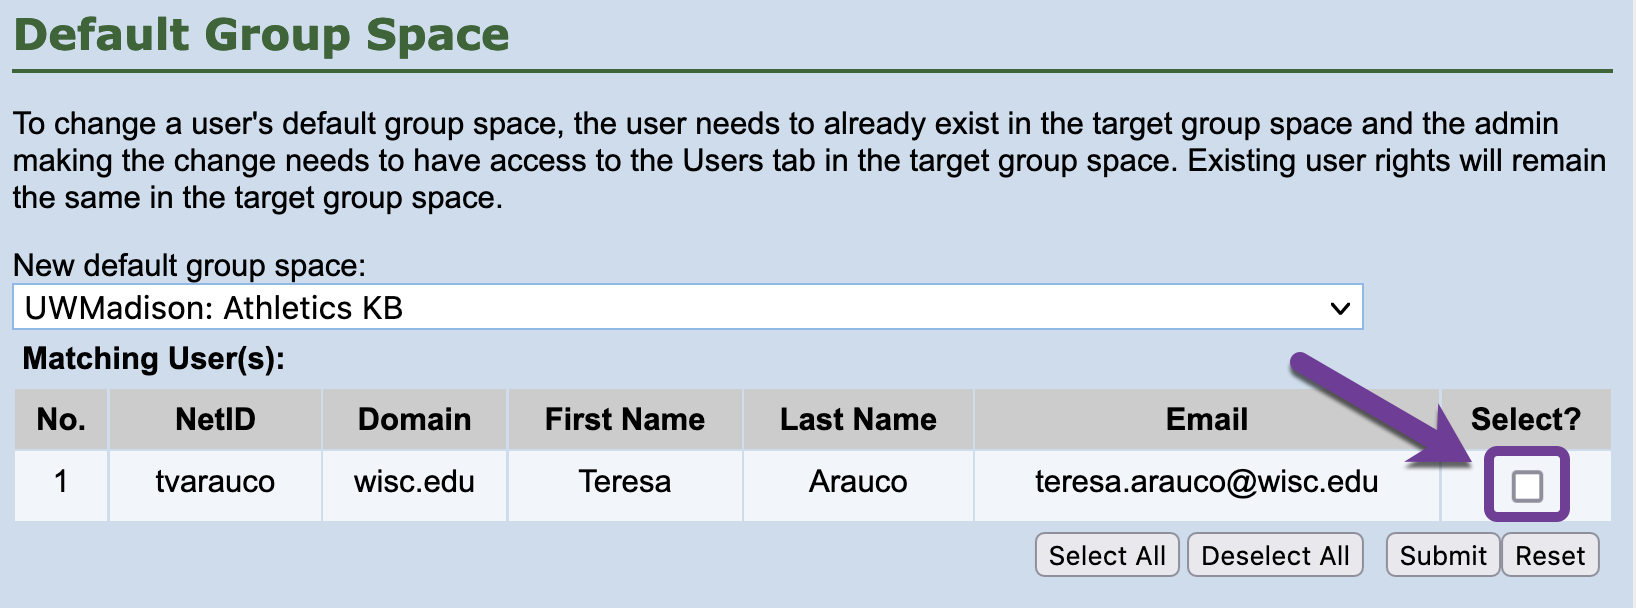 List of users for a specific group space highlighting the select checkbox for an individual user